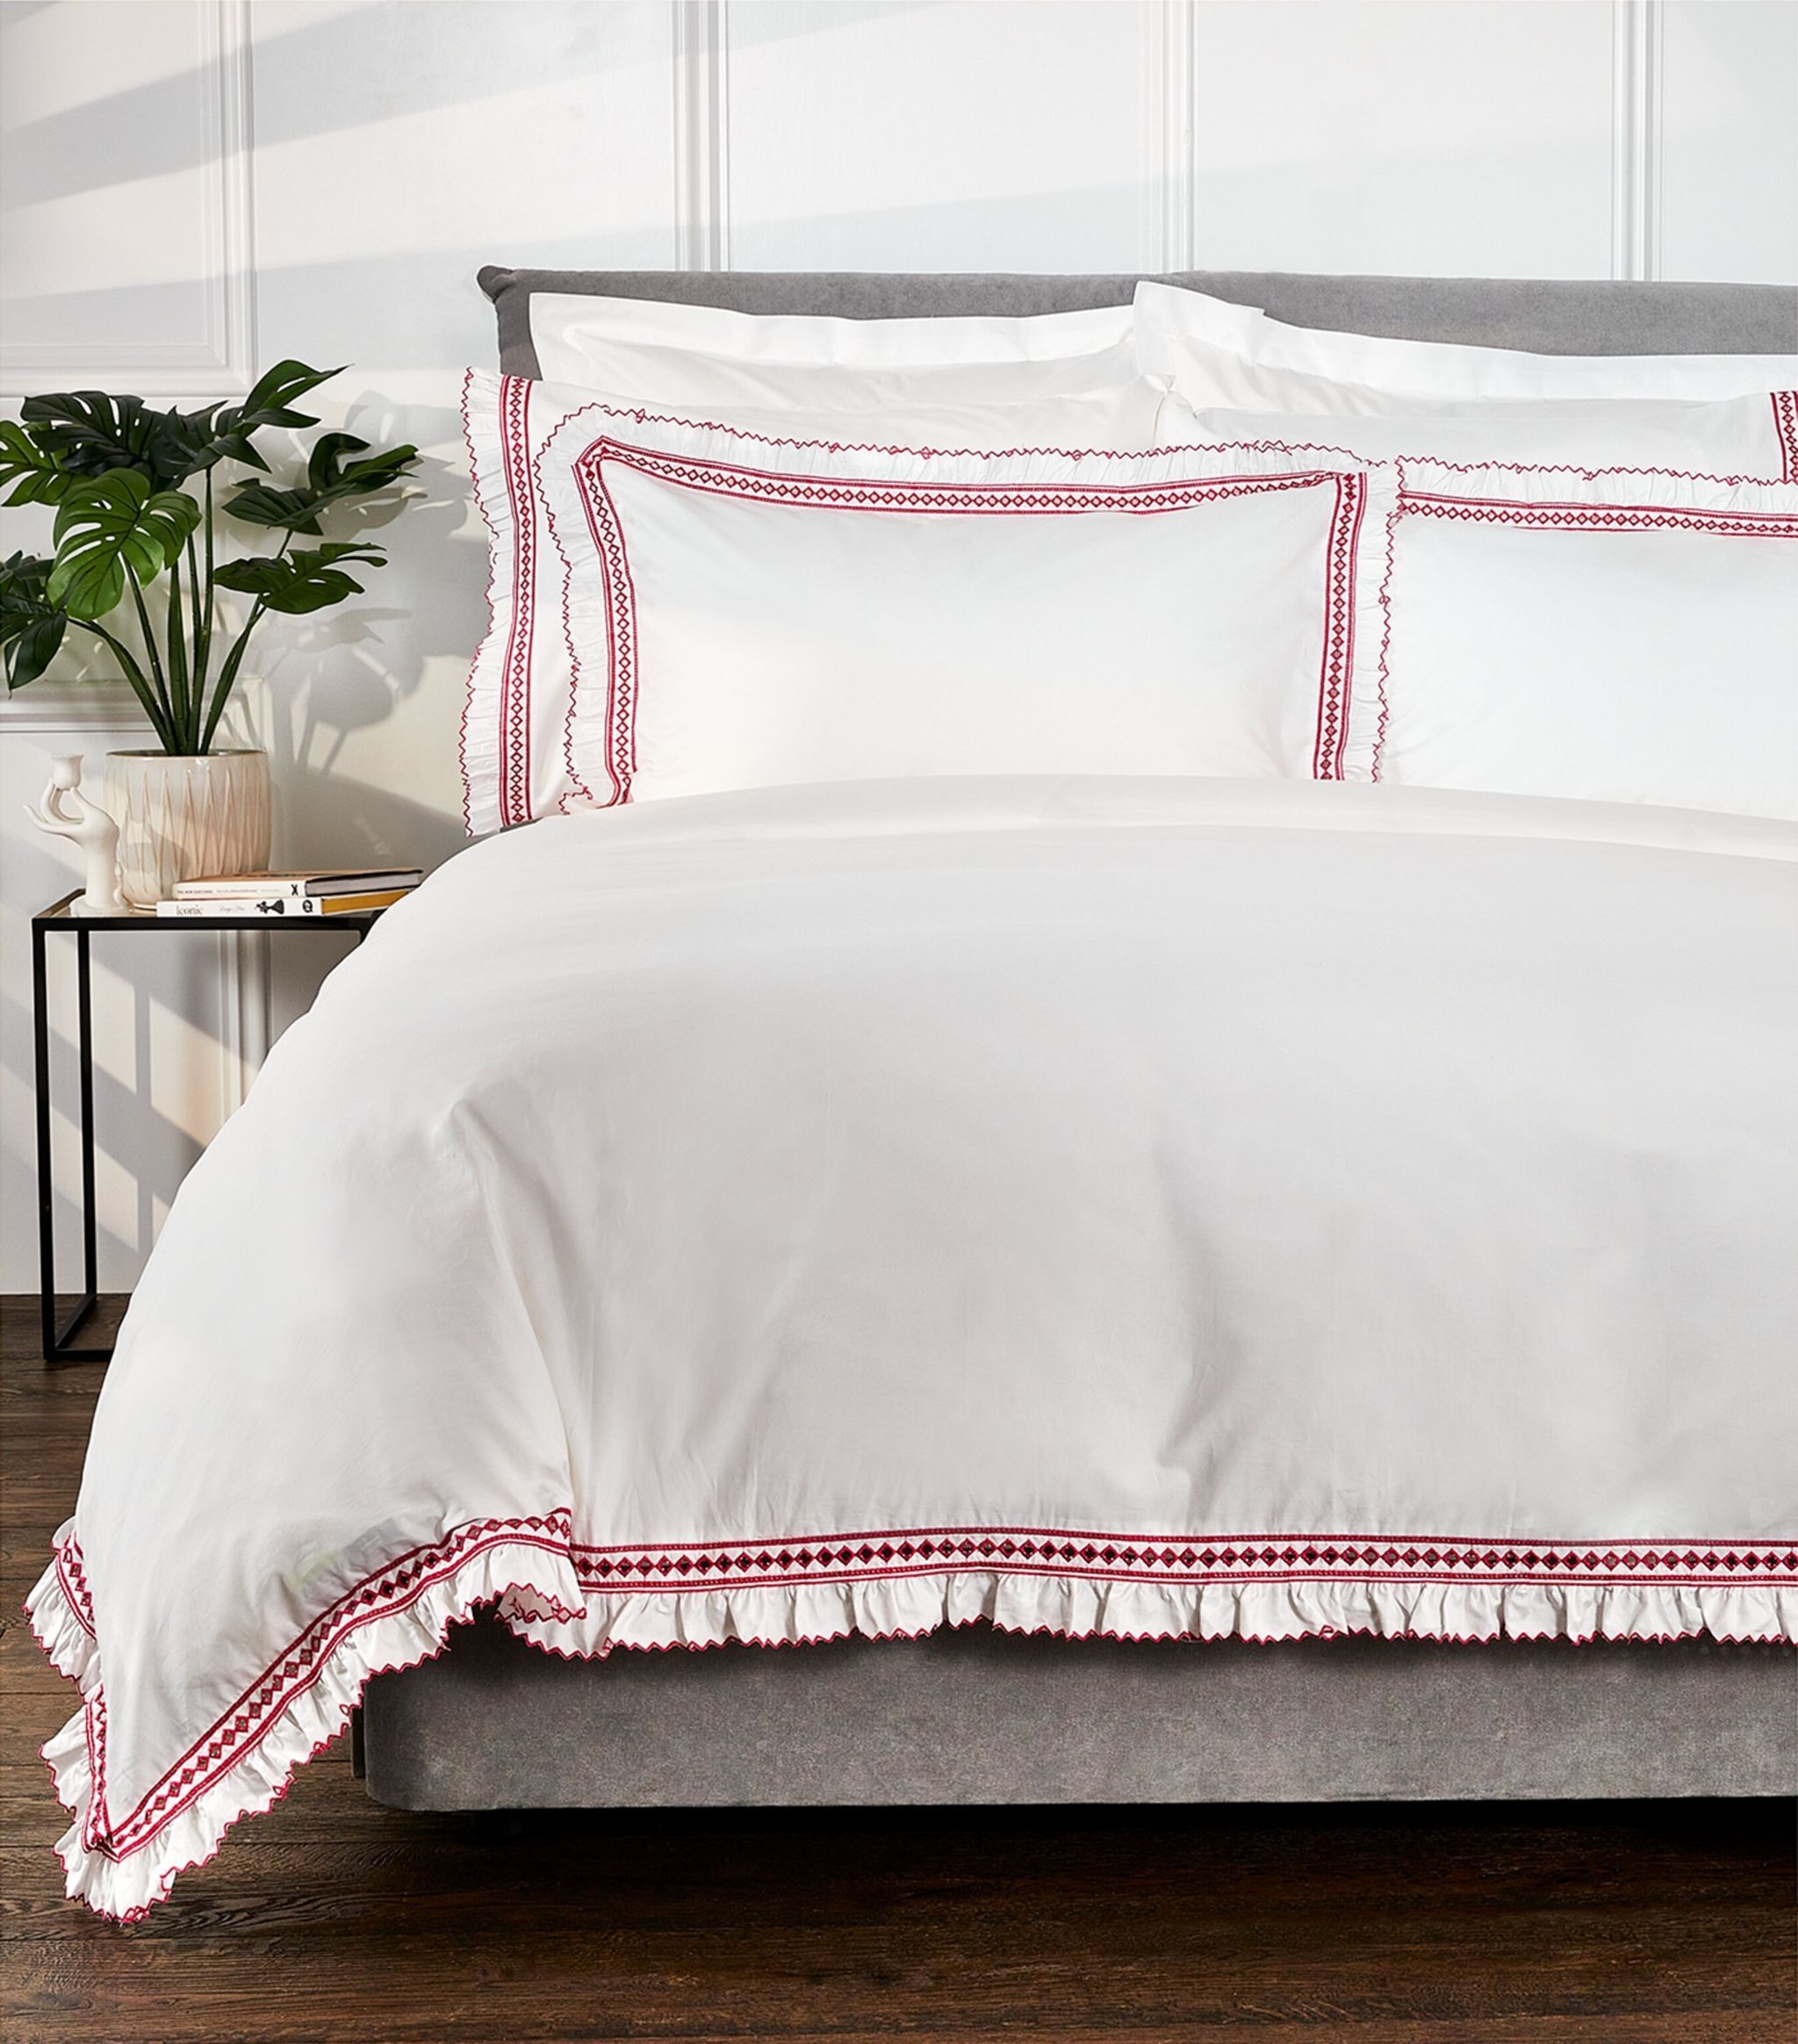 The best Egyptian cotton bedding sets for Autumn and beyond